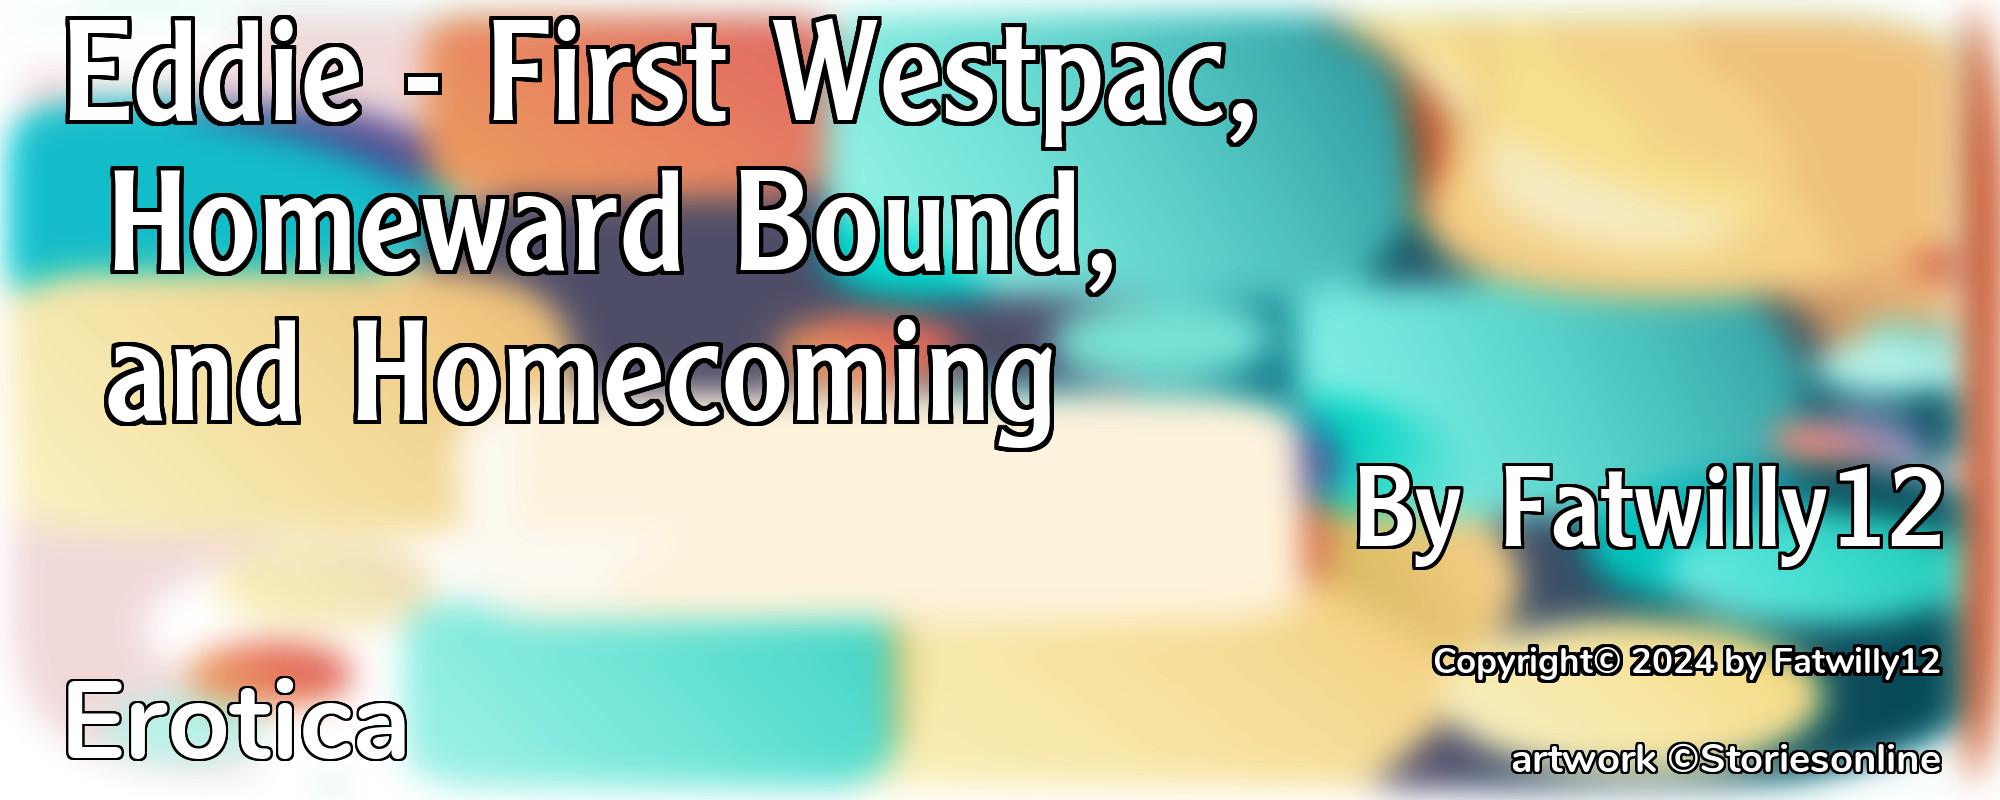 Eddie - First Westpac, Homeward Bound, and Homecoming - Cover